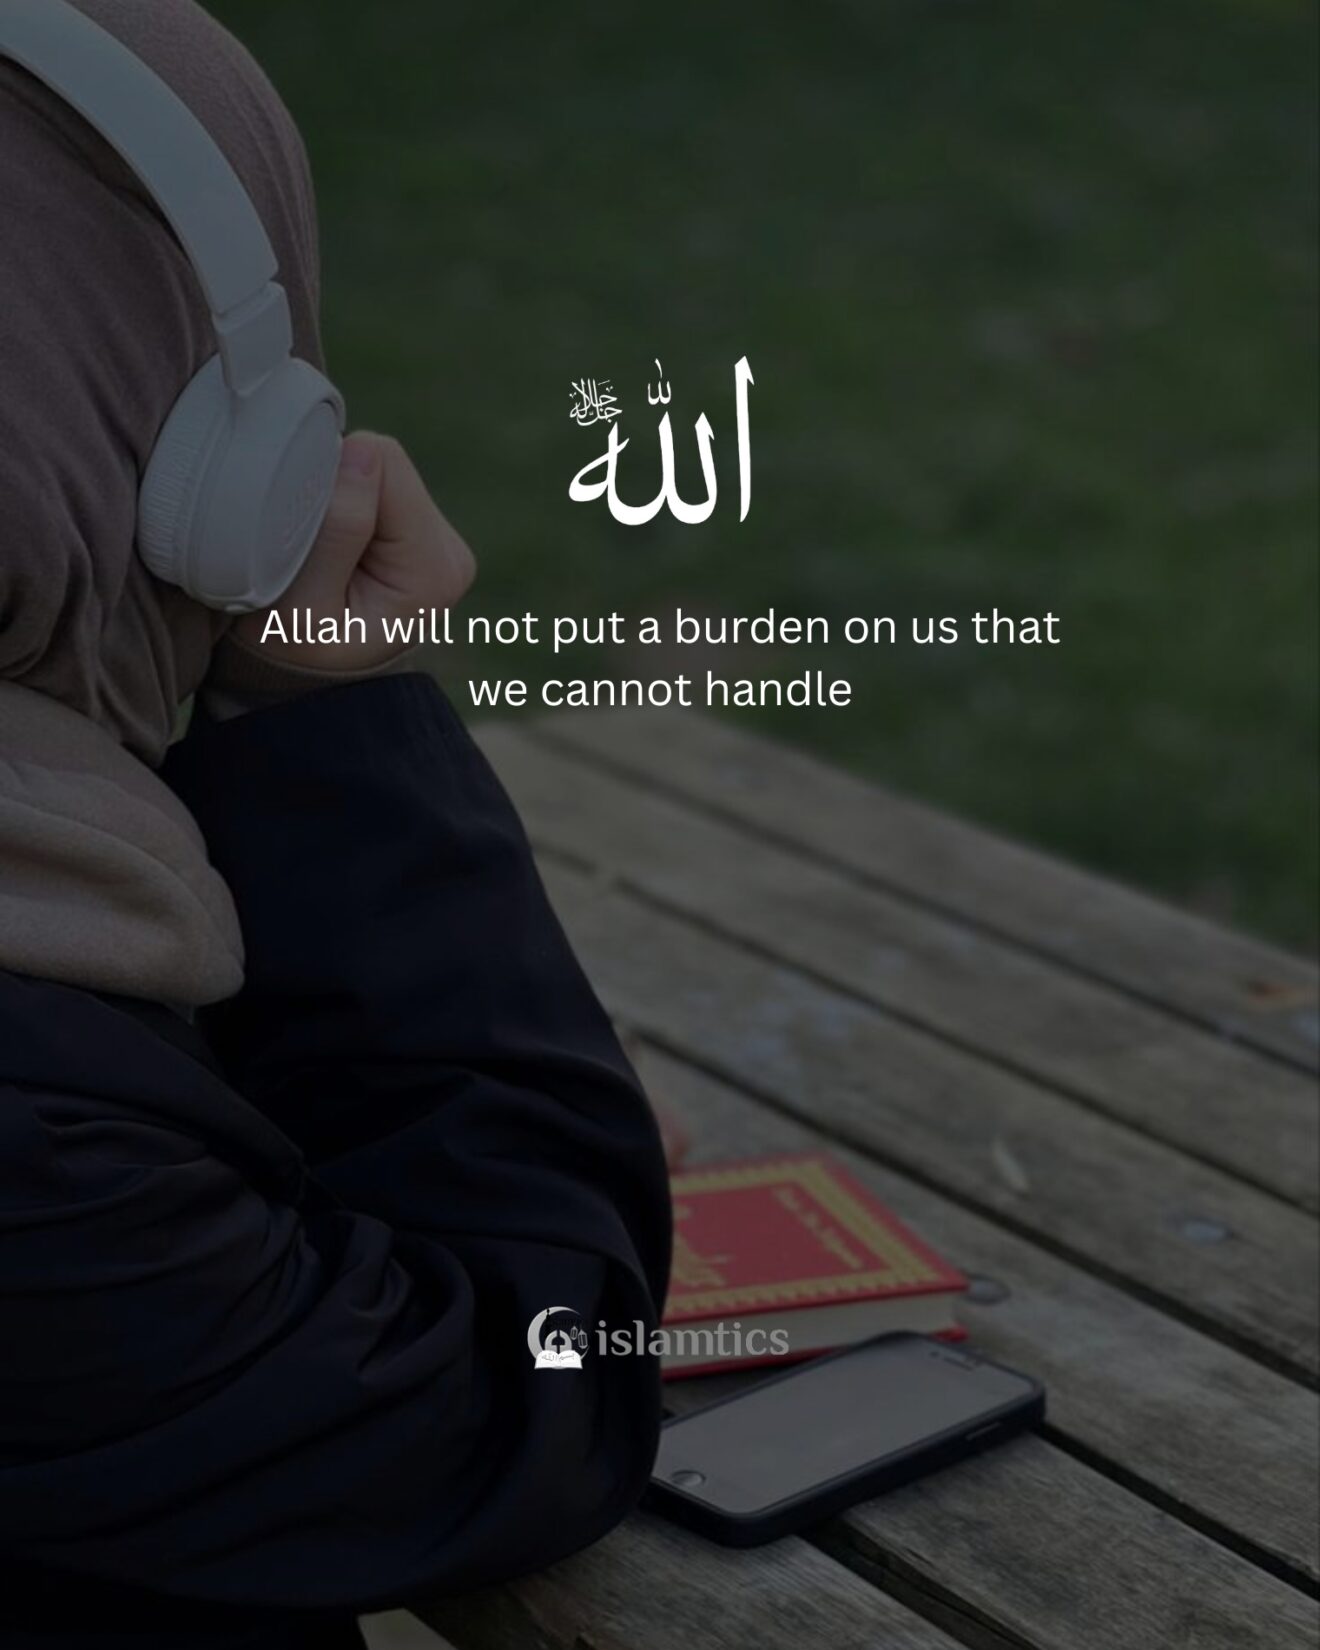  Allah will not put a burden on us that we cannot handle